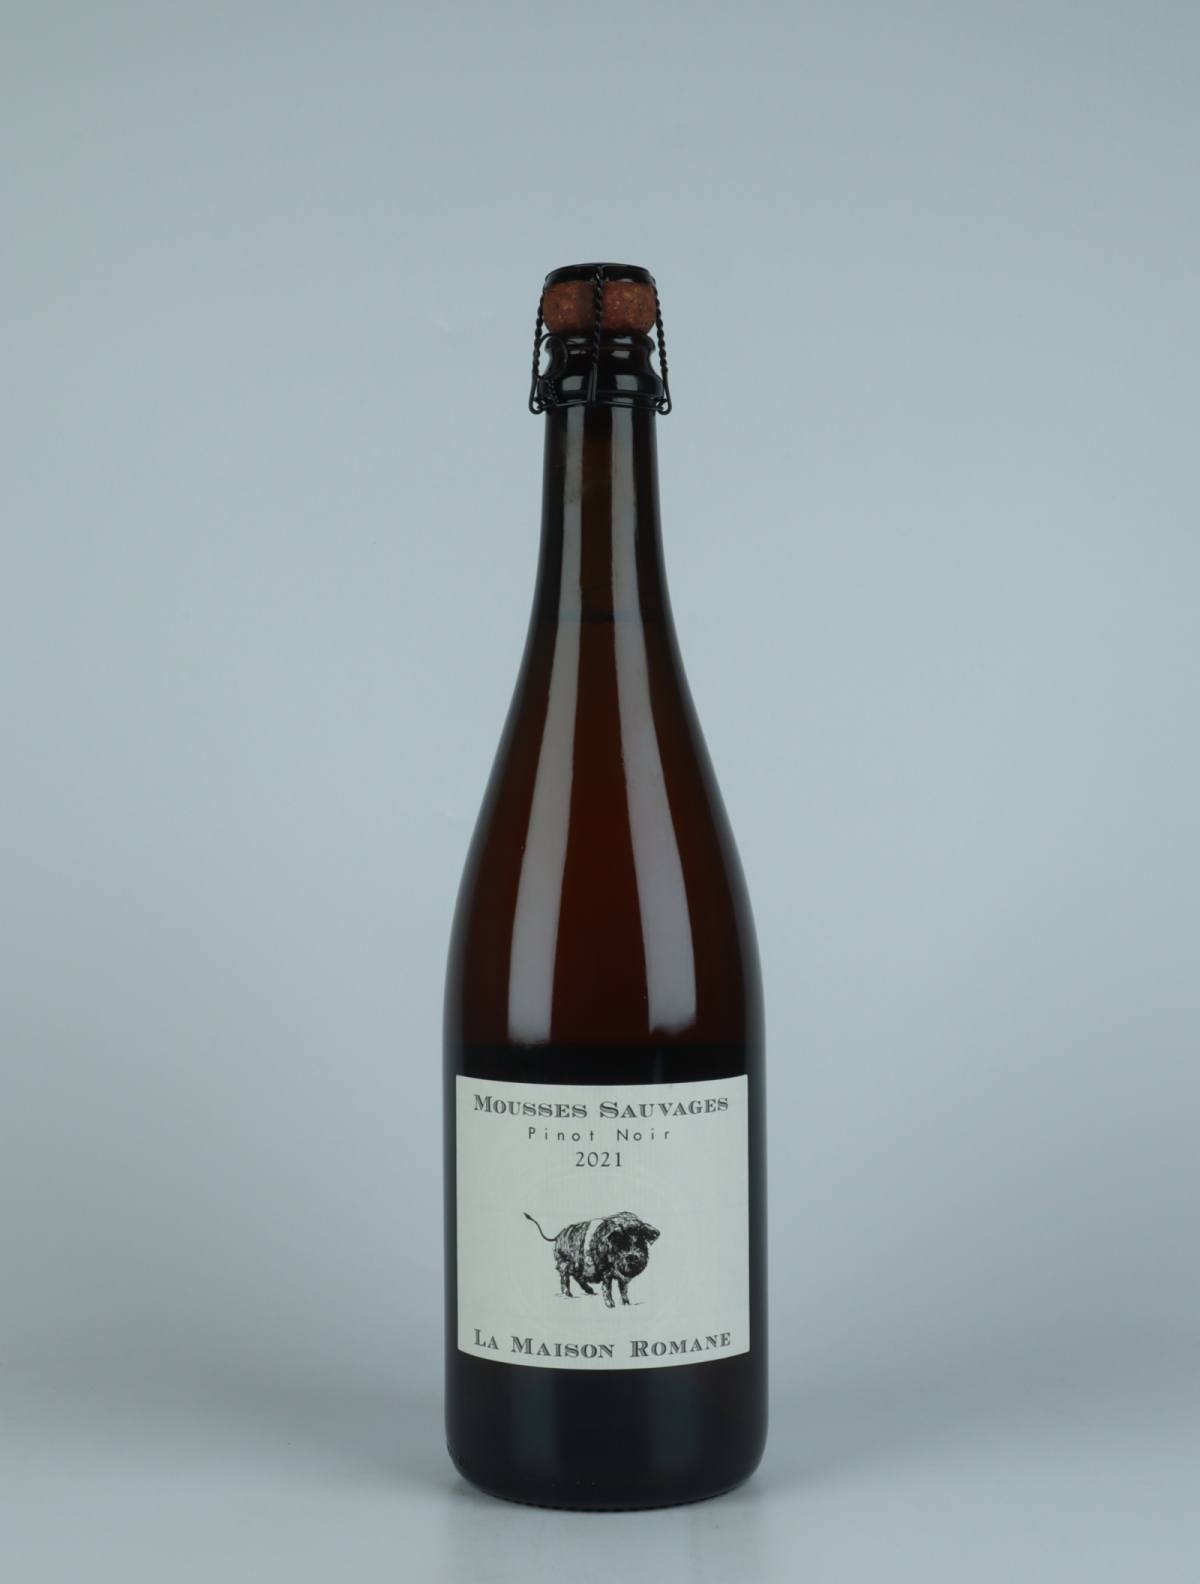 A bottle 2021 Mousses Sauvages Pinot Noir Beer from La Maison Romane, Burgundy in France